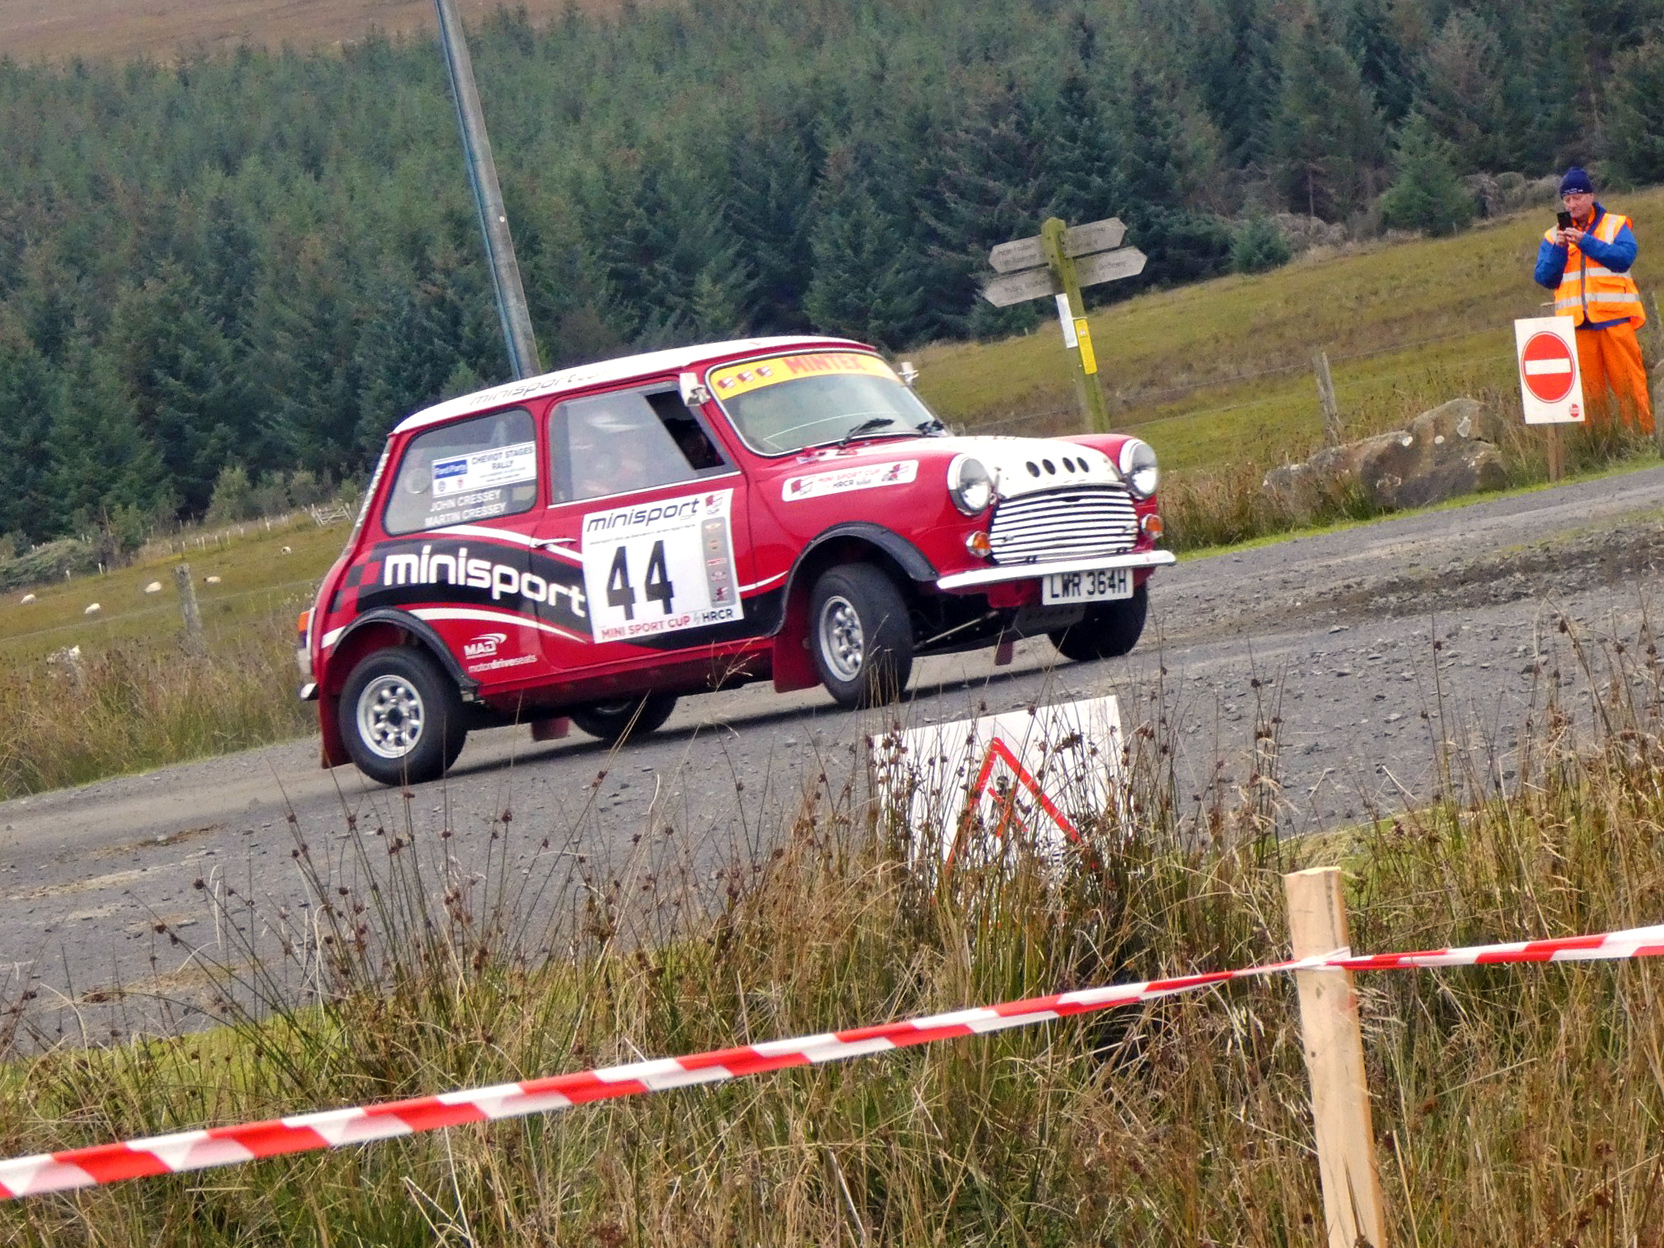 Cheviot Stages Rally Report - Round 8 of the Mini Sport Cup